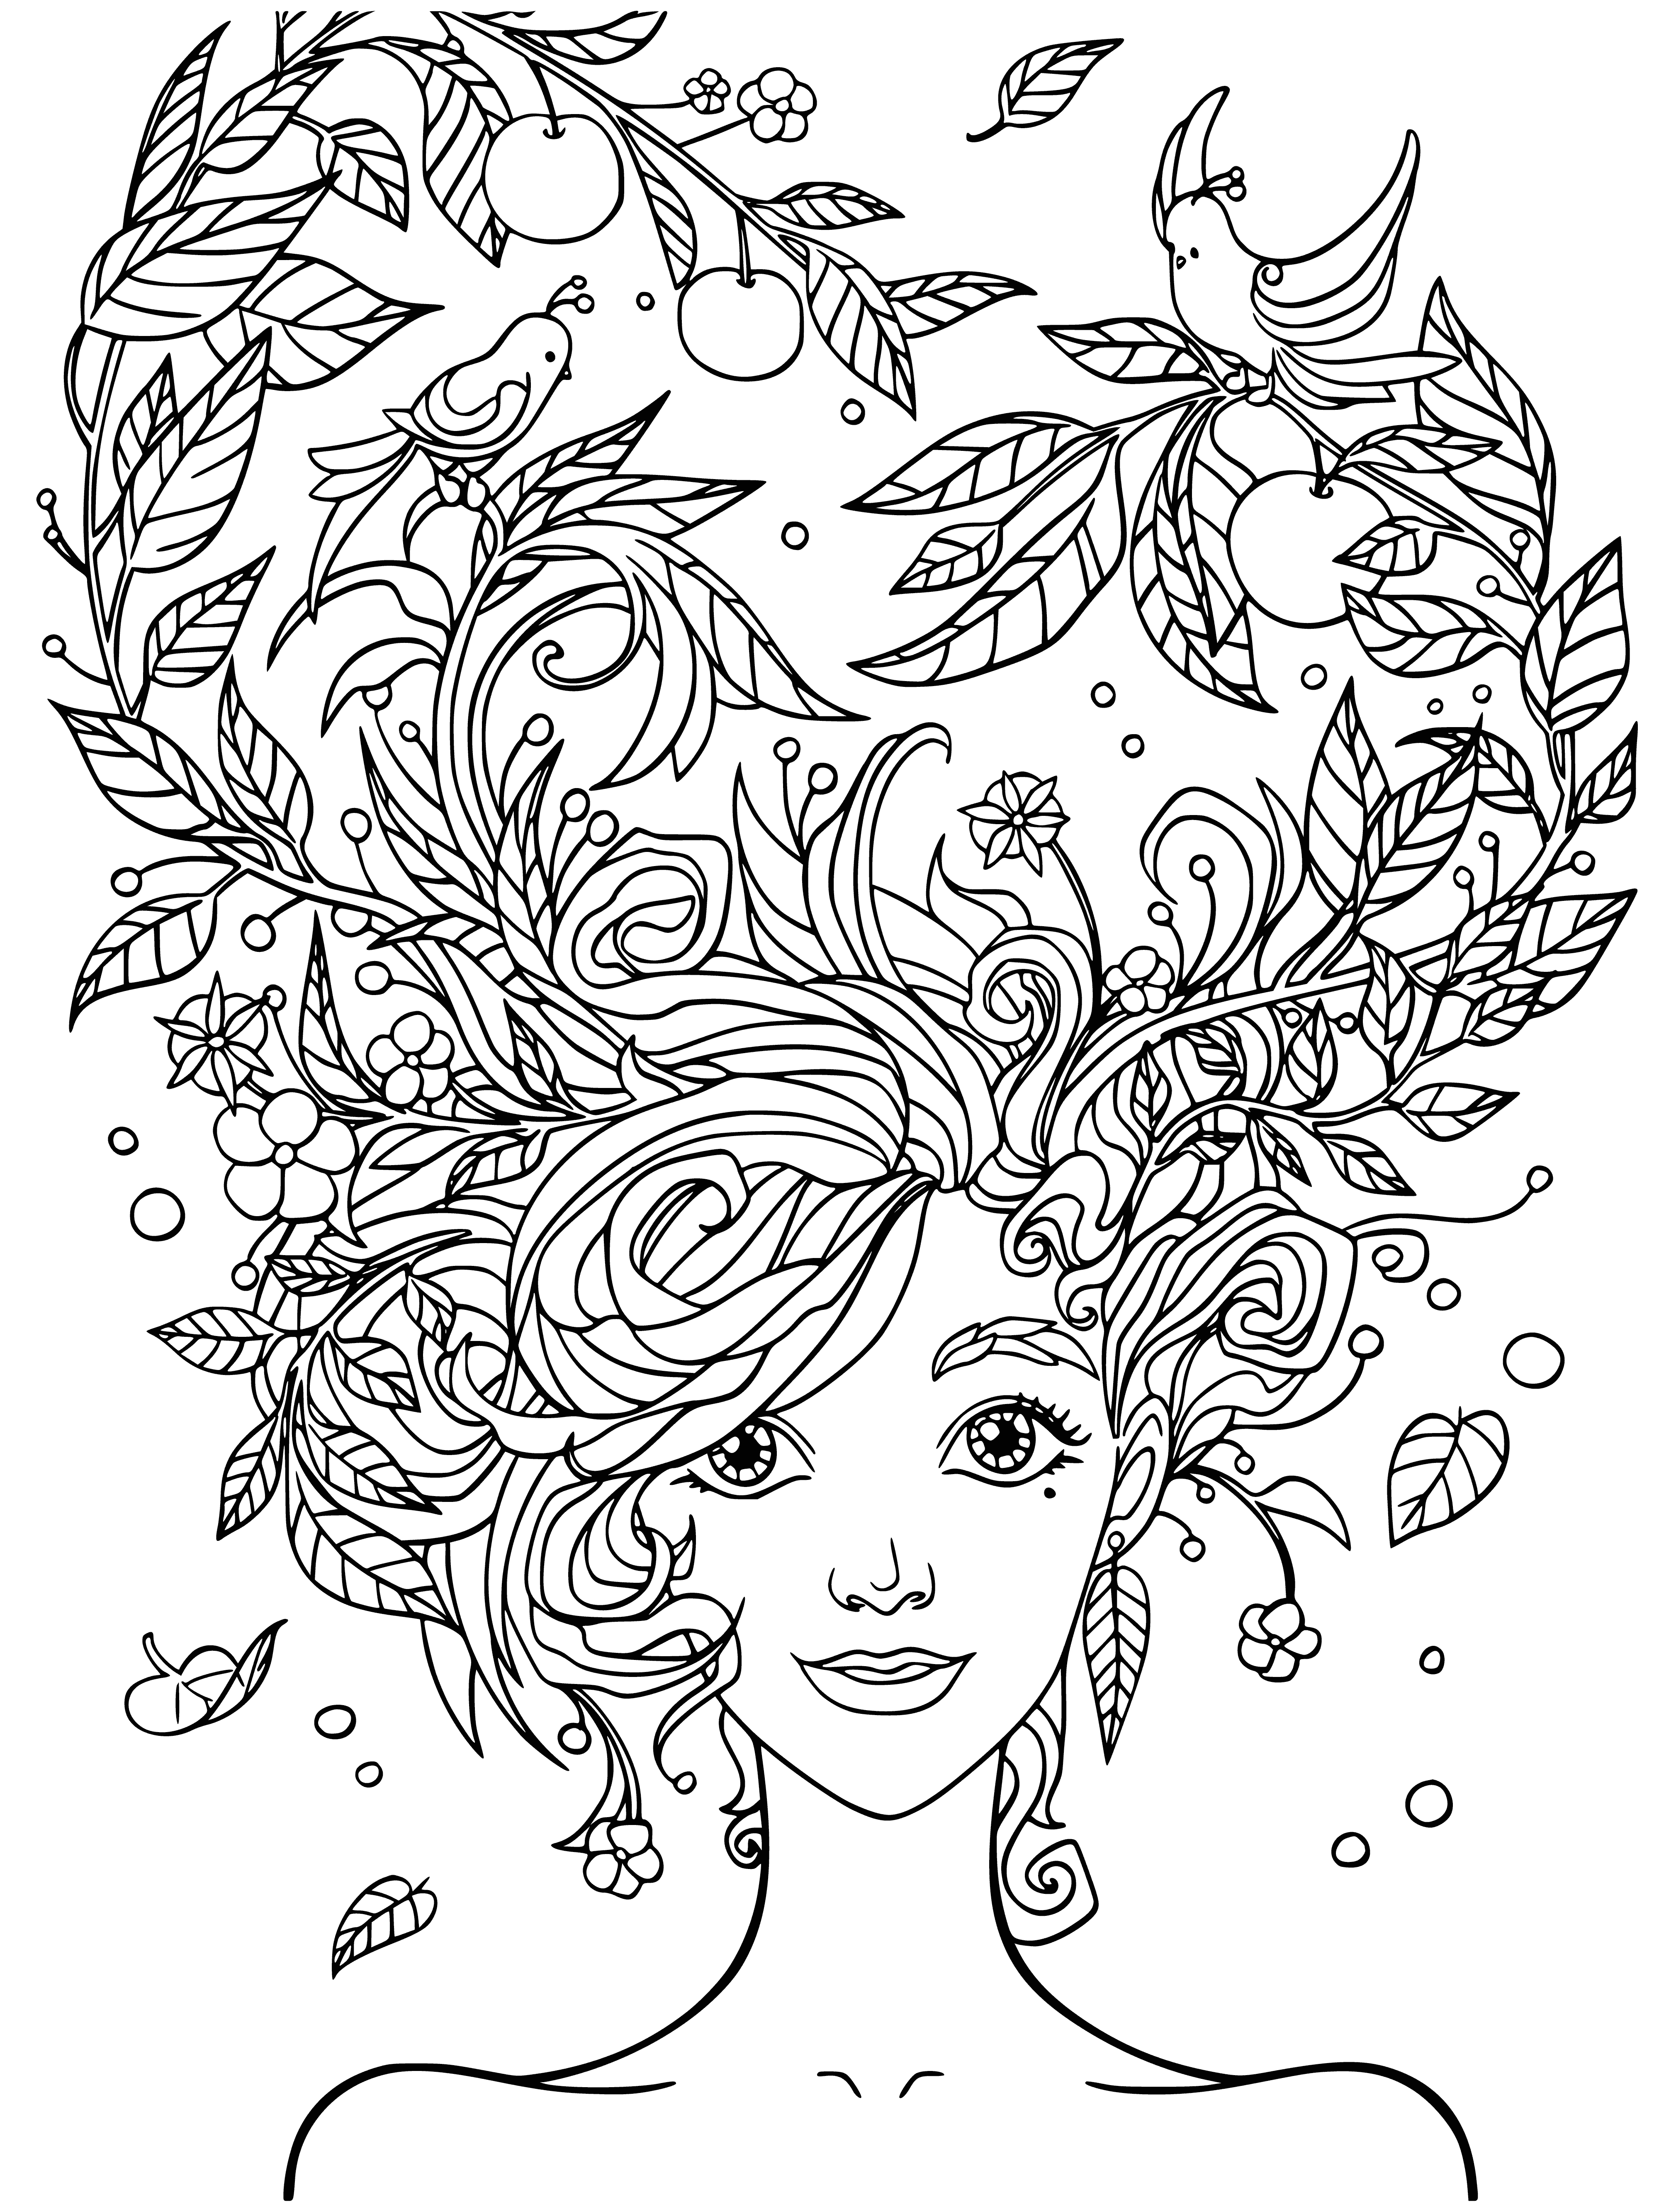 Blooming garden coloring page